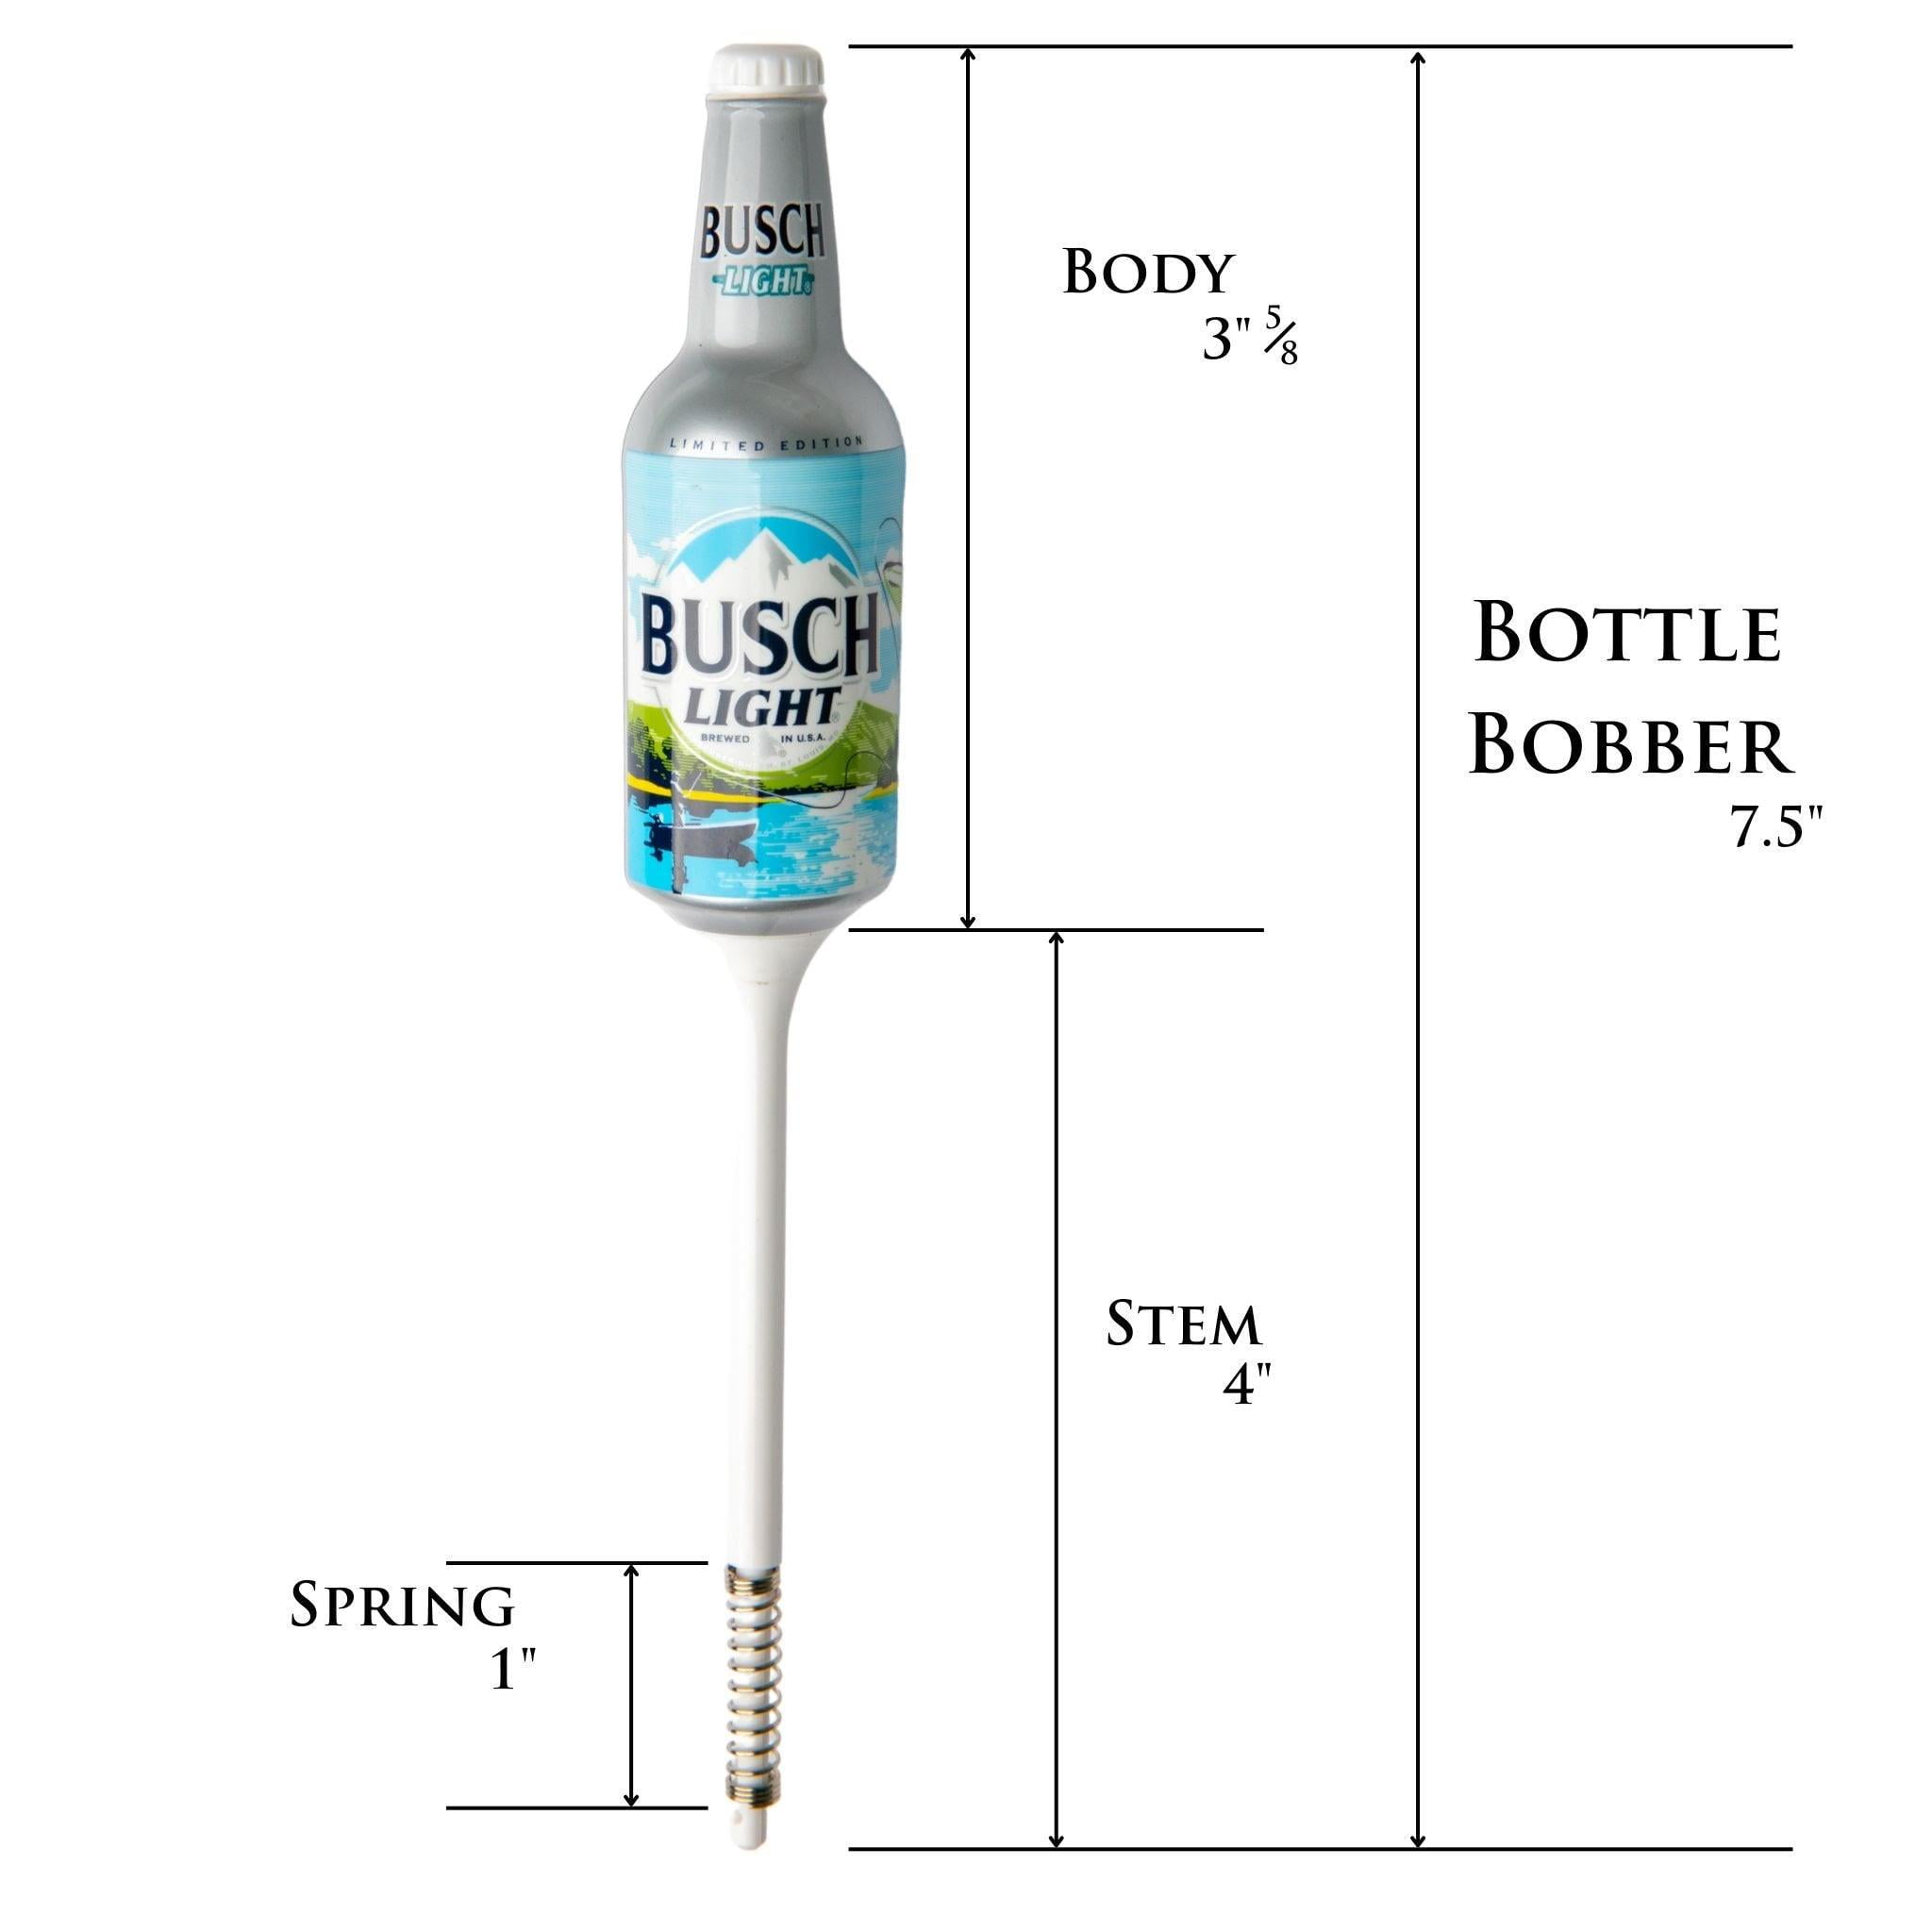 Southern Bell Brands Busch Light Fishing Bobber 2 Pack- Fishing Gear for Your Tackle Box